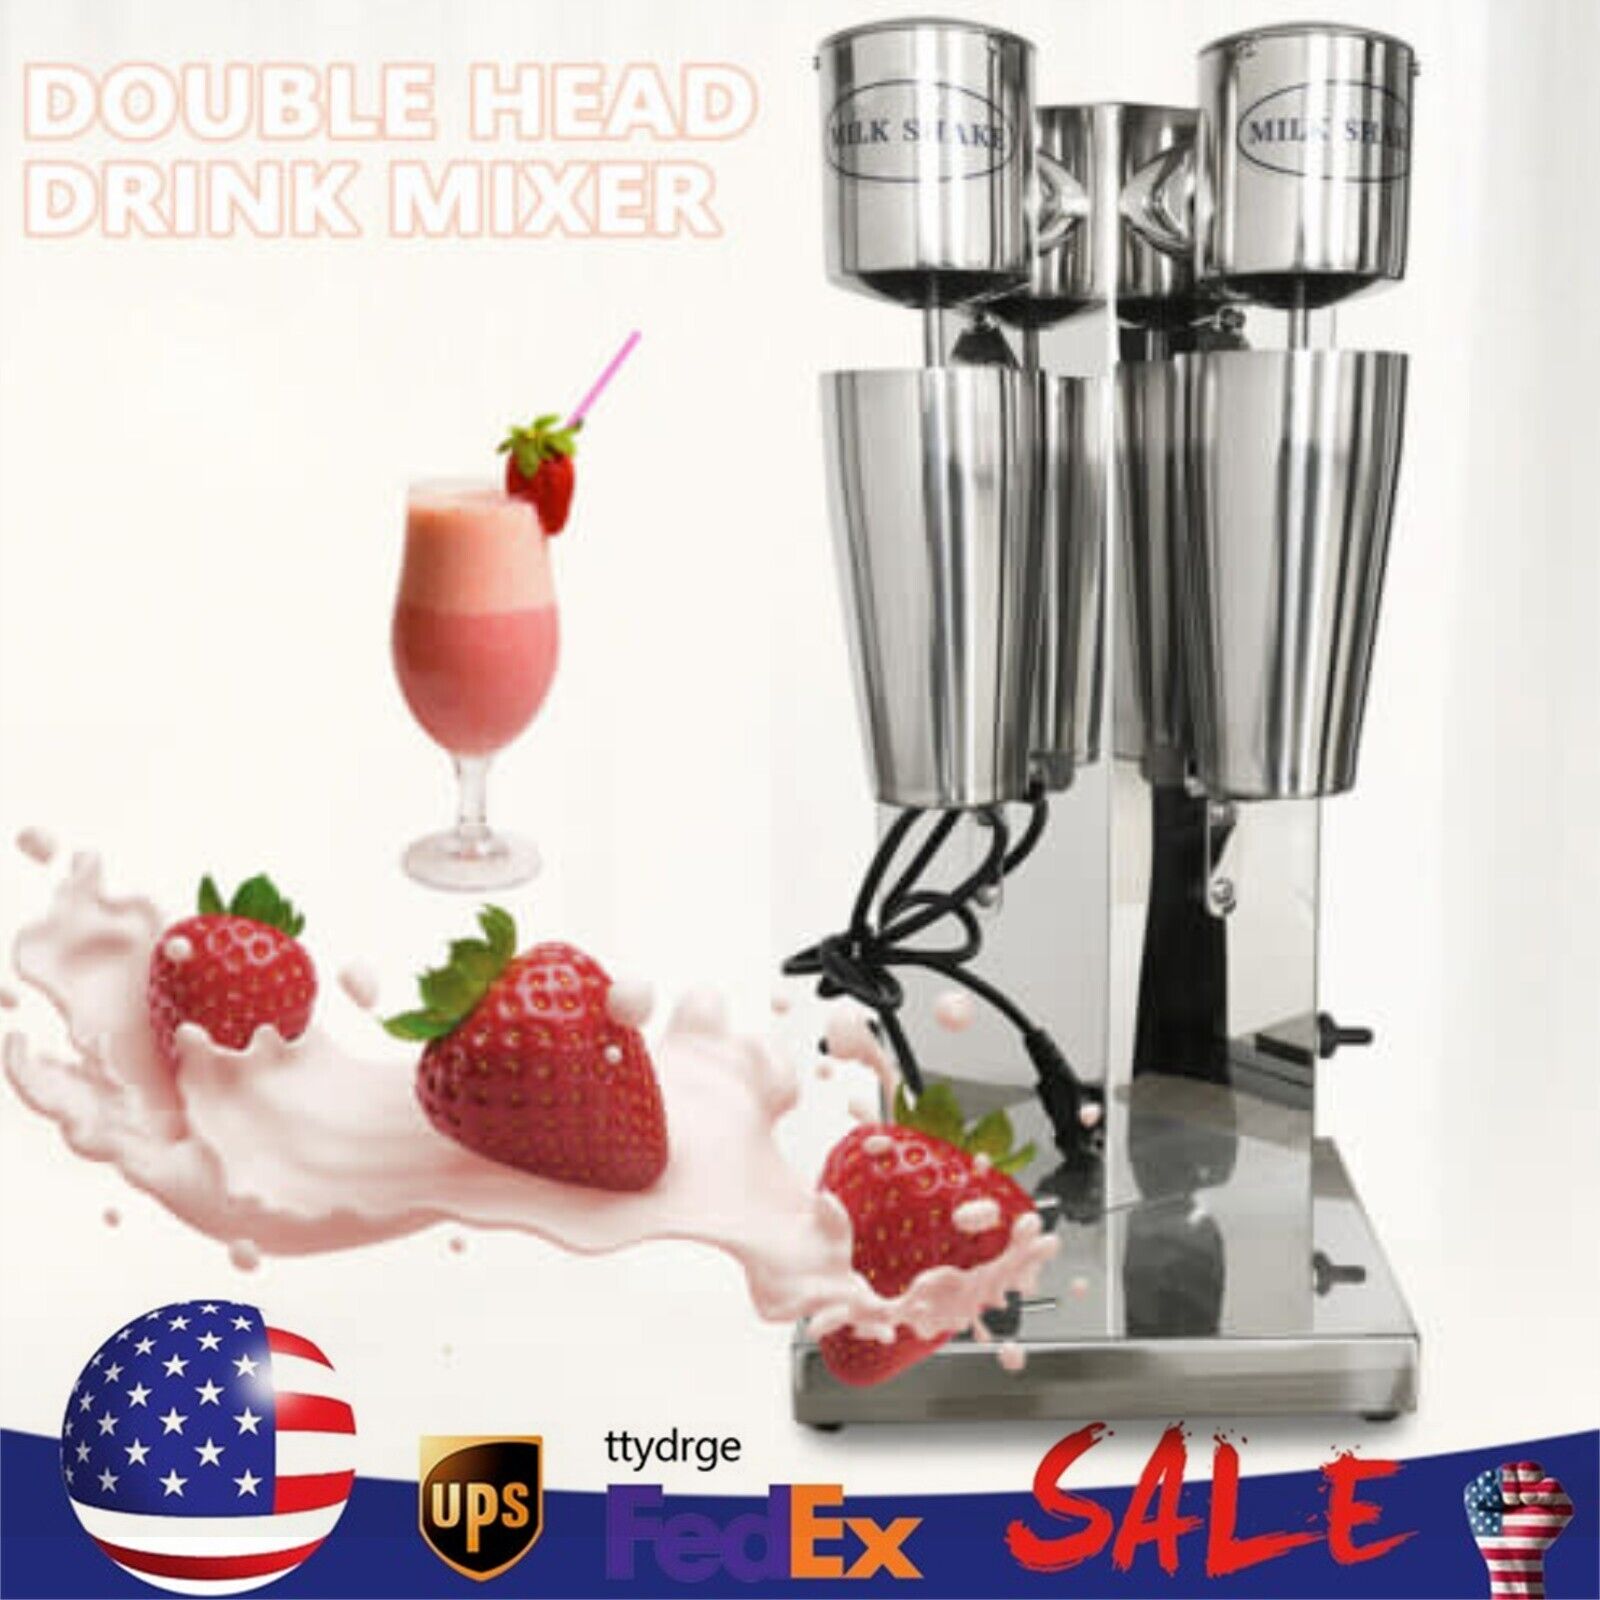 360W Commercial Stainless Steel Milk Shake Machine Double Head Blender Mixer